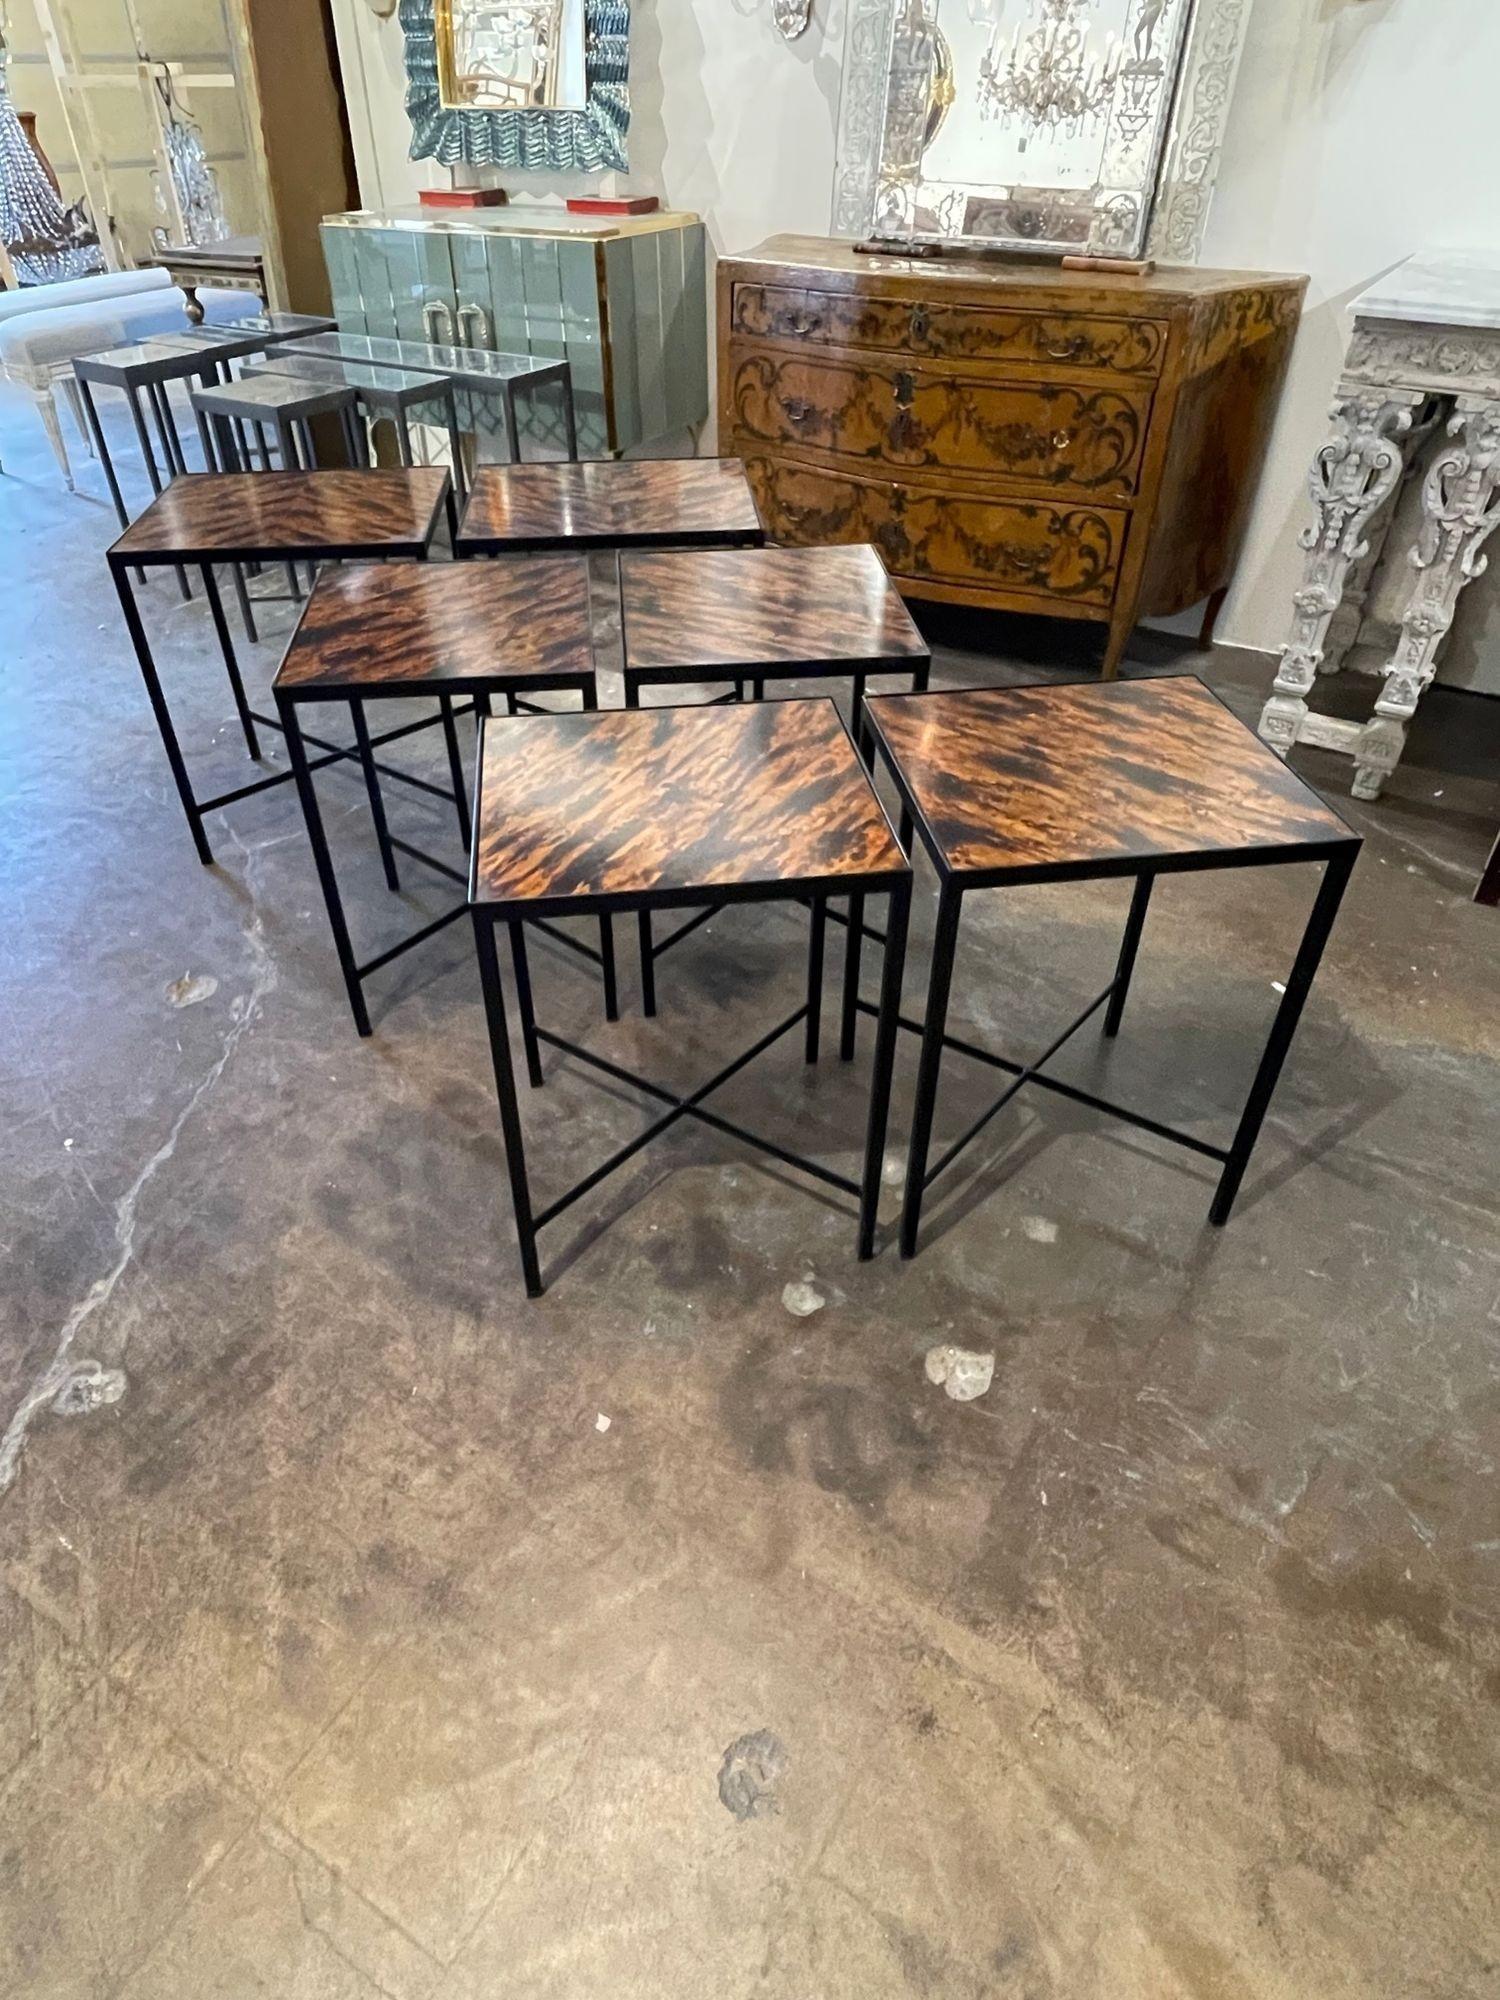 Great vintage steel side tables with faux tortoise tops. Creates a very style modern look! Note: The price listed is for one. And measurement listed is for the larger table. The other is slightly smaller.